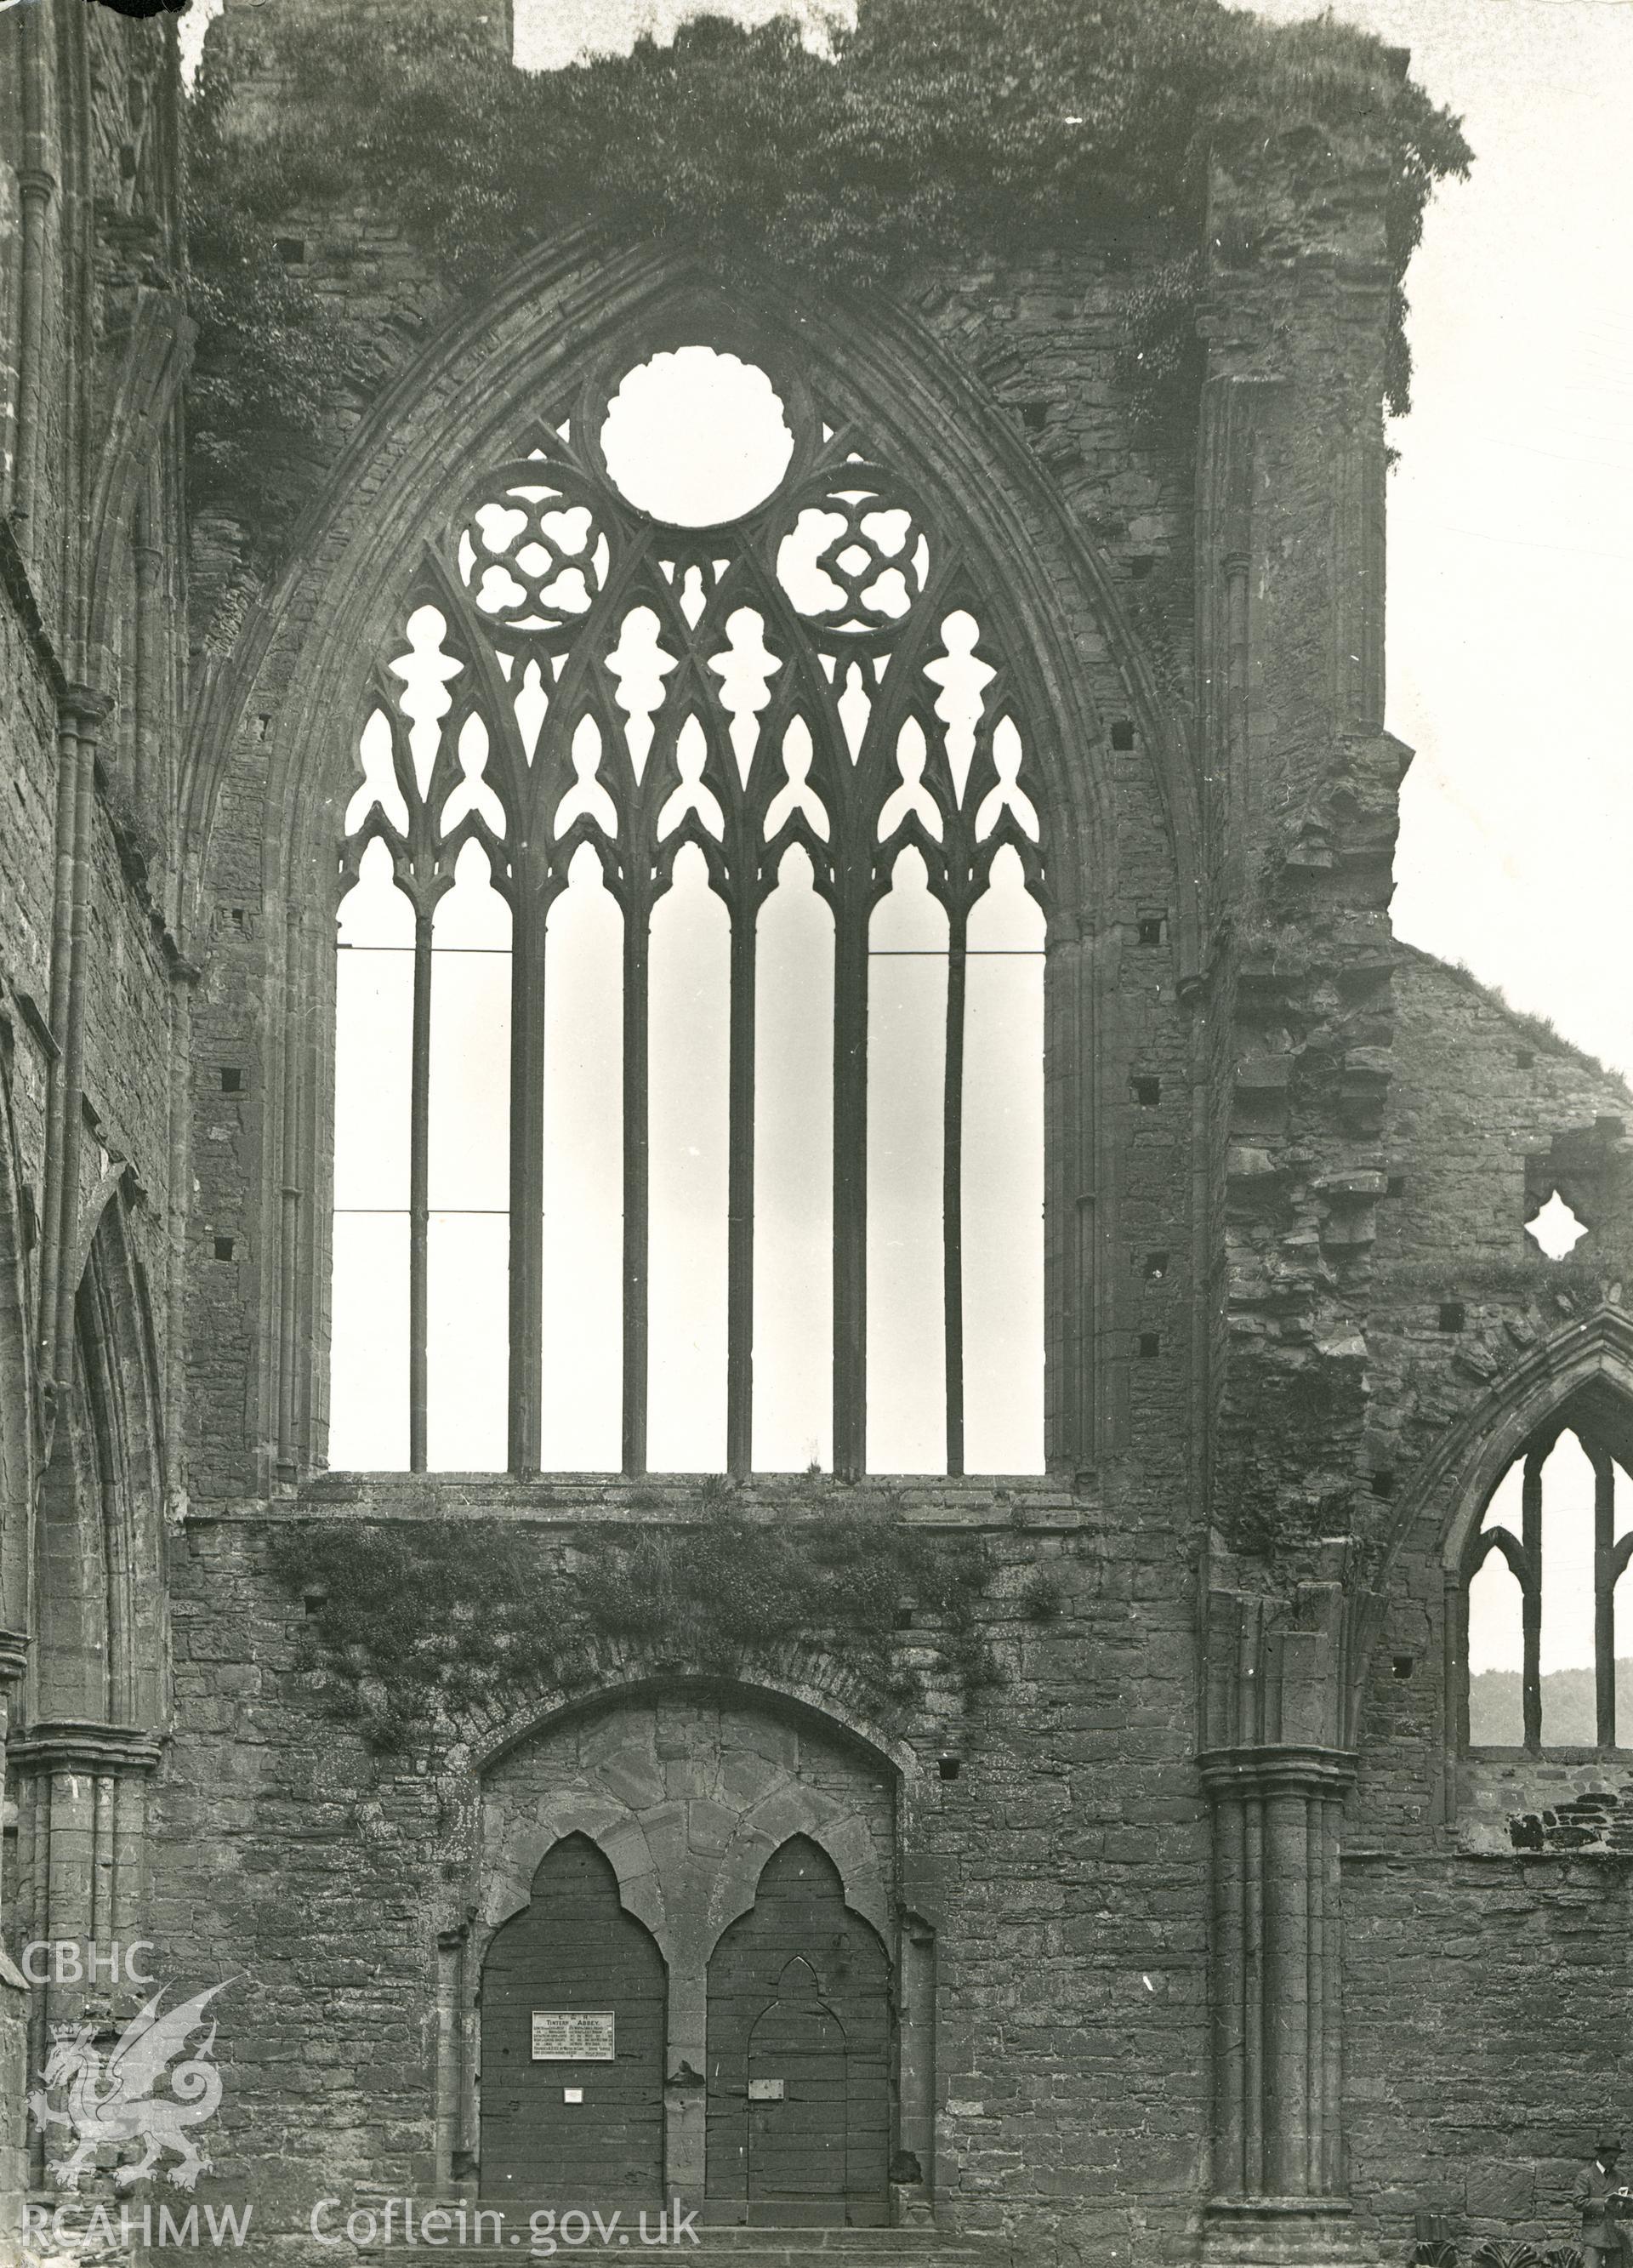 Digital copy of an interior view of east window at Tintern Abbey by T Coysh c1953.